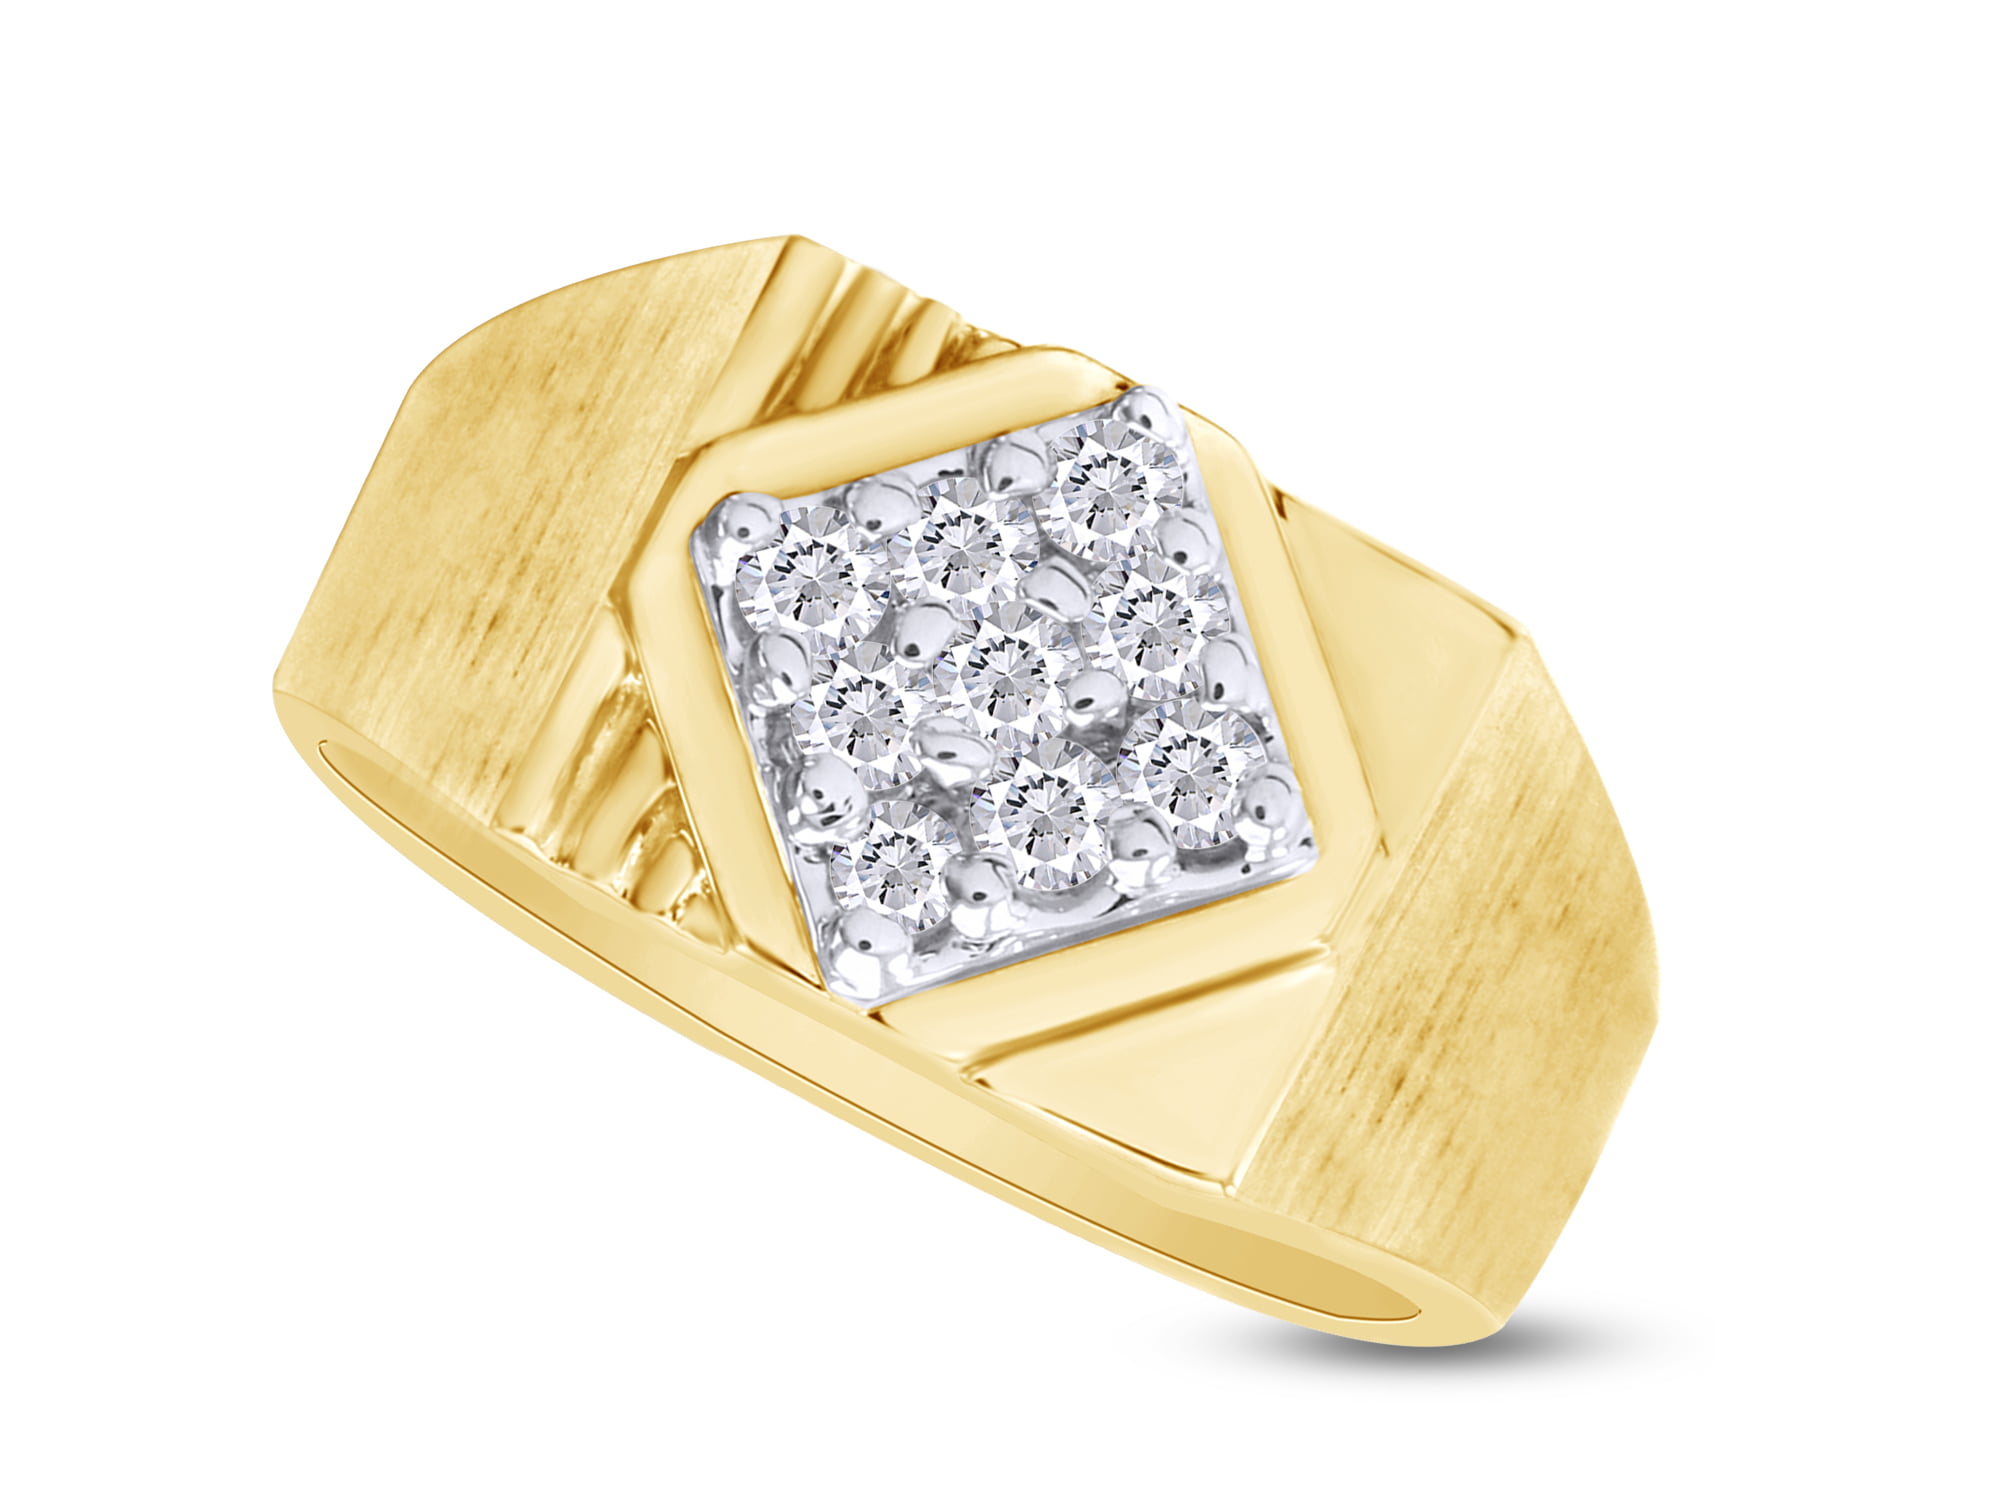 Wishrocks Simulated Birthstone with CZ Mens Wedding Band Ring in 14K Yellow Gold Over Sterling Silver 